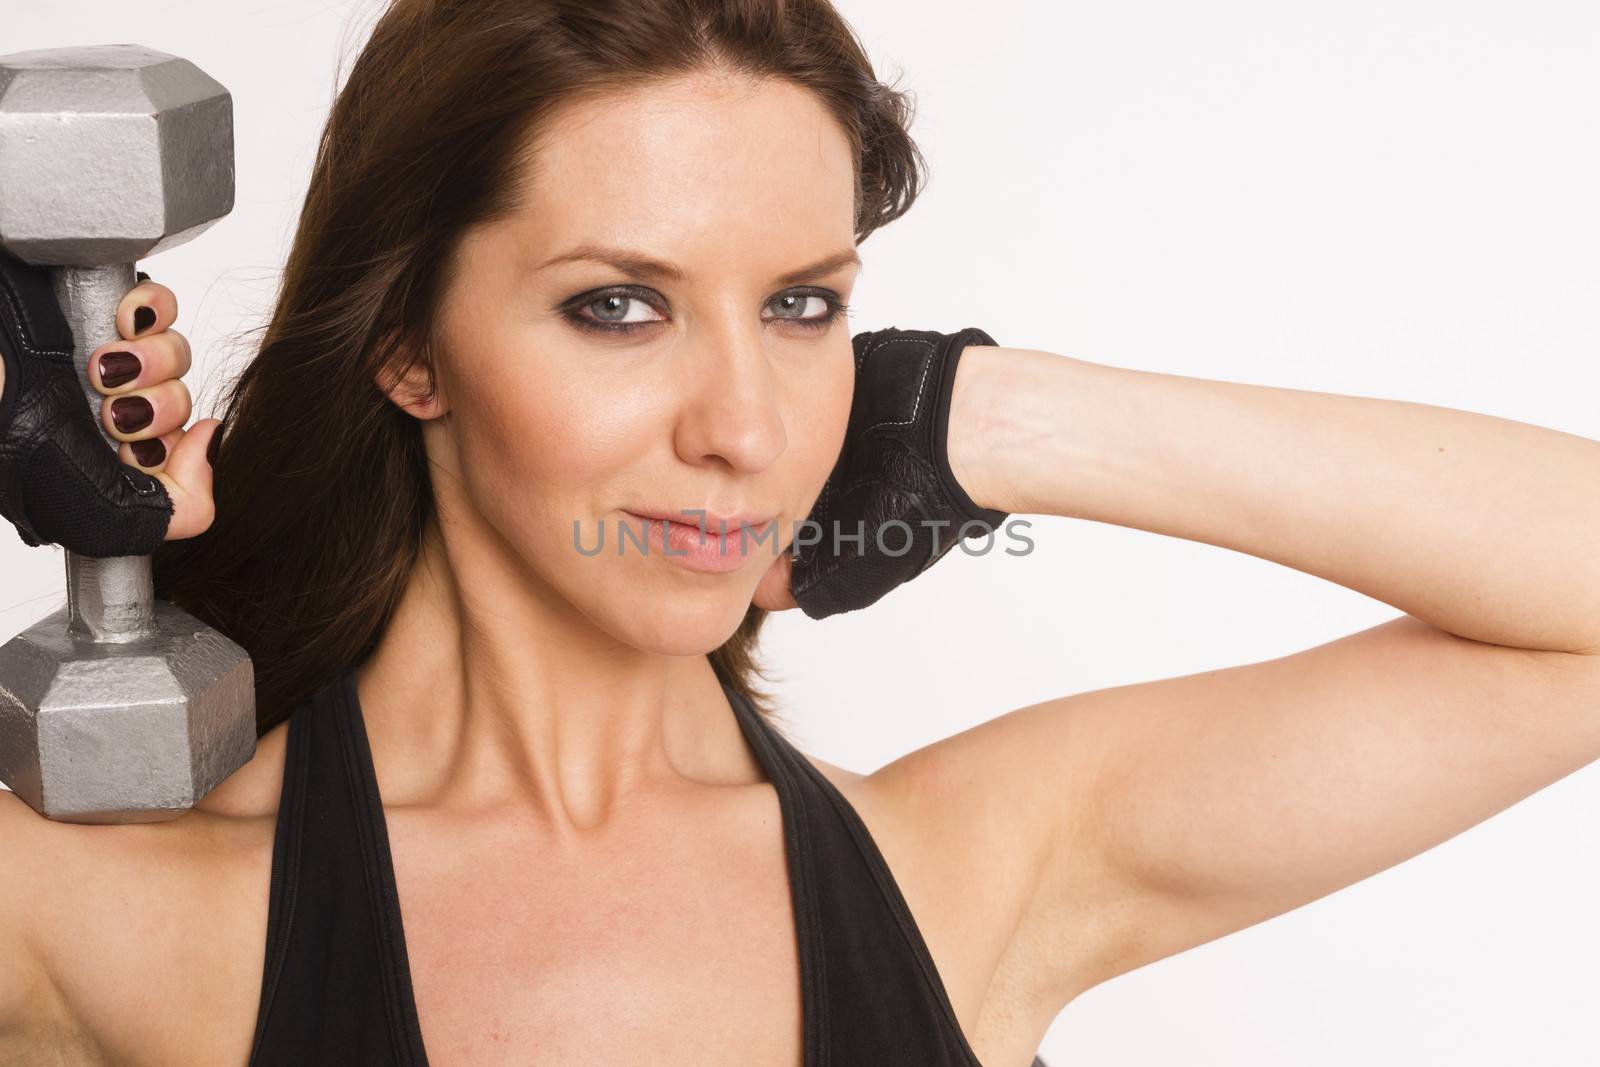 Attractive Brunette Woman Working Out Curling Barbells White Background by ChrisBoswell